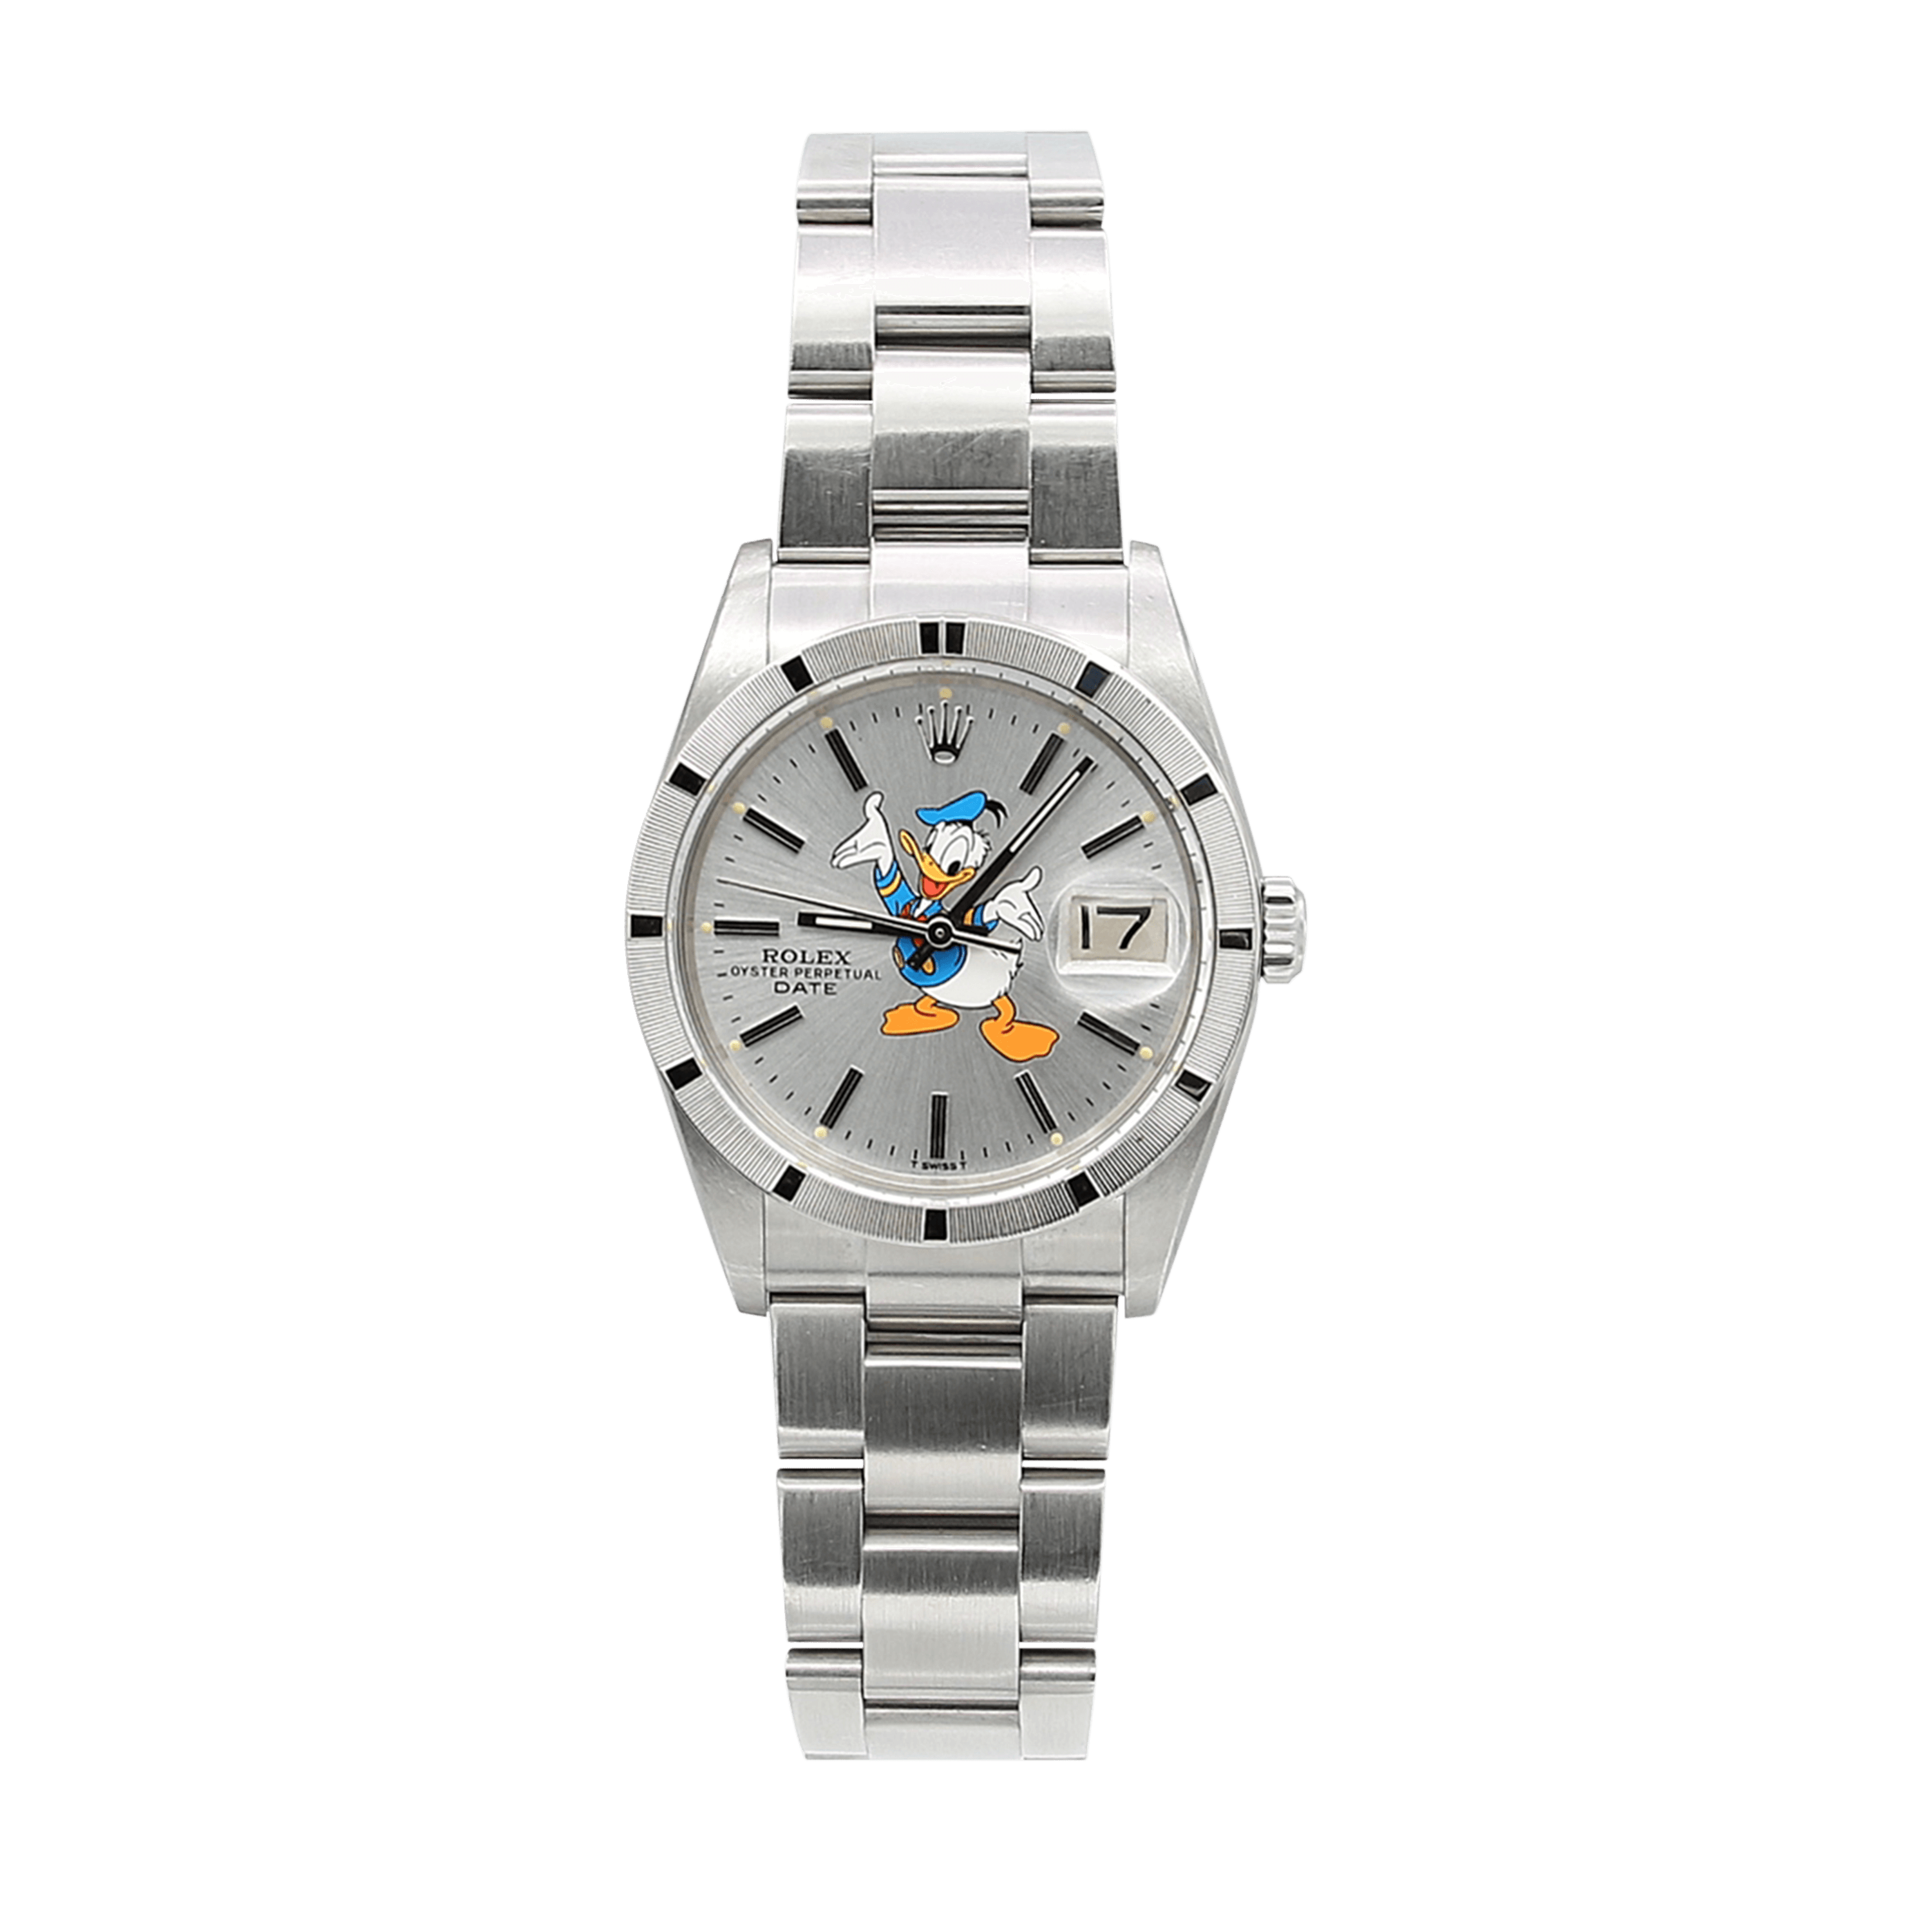 Rolex Oyster Perpetual Date ref. 1501 34mm - Donald Duck Dial - Oyster bracelet